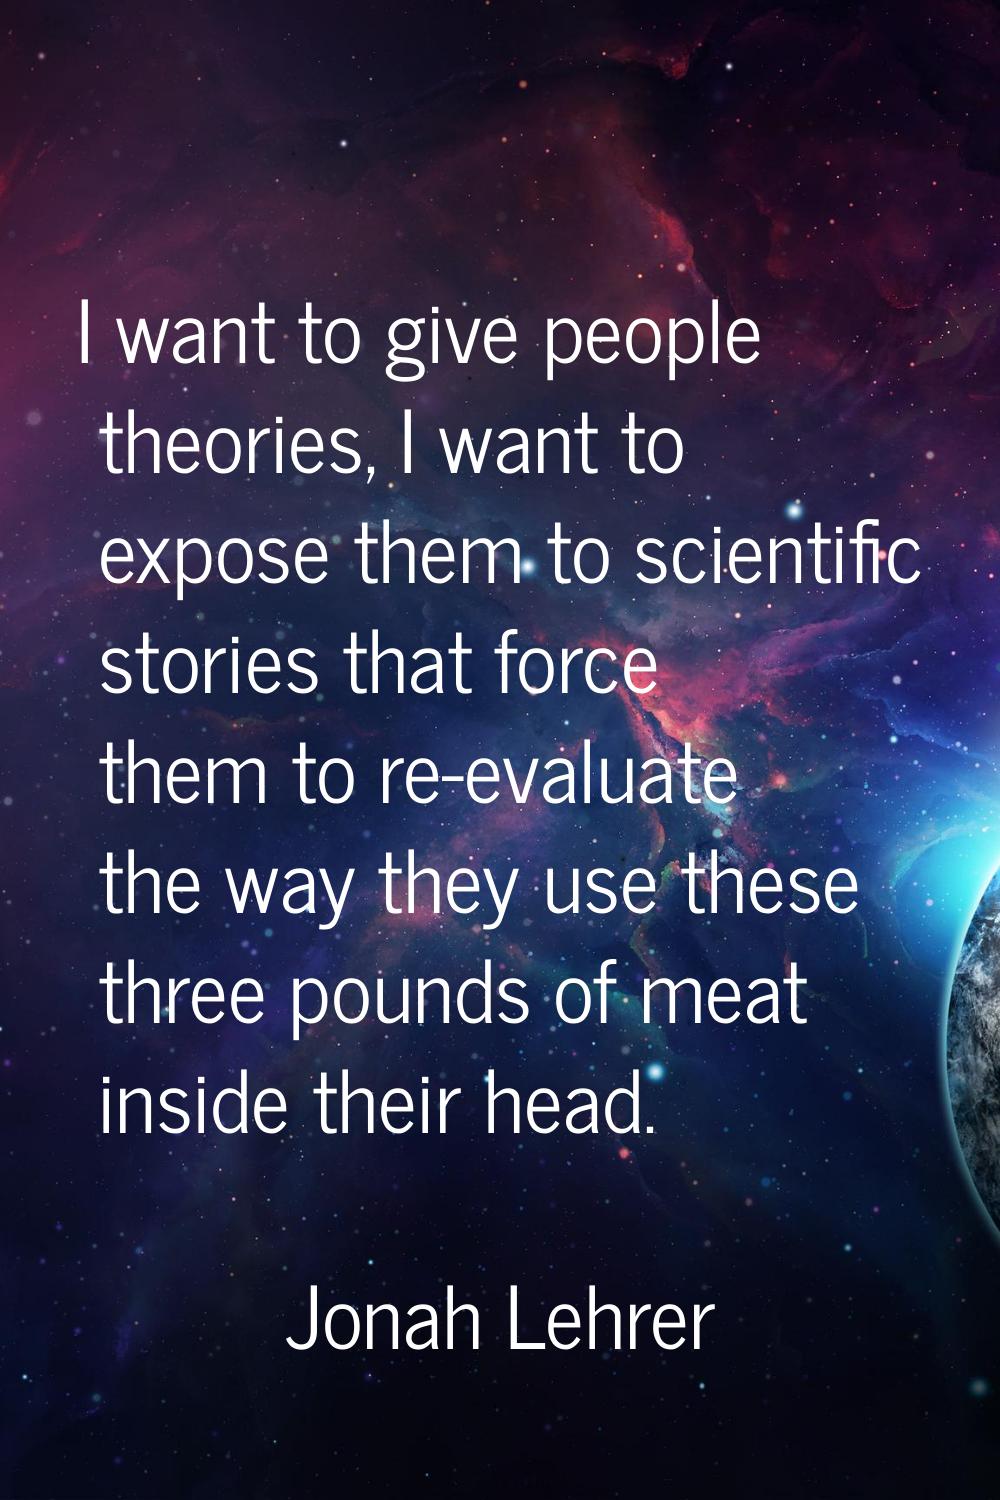 I want to give people theories, I want to expose them to scientific stories that force them to re-e